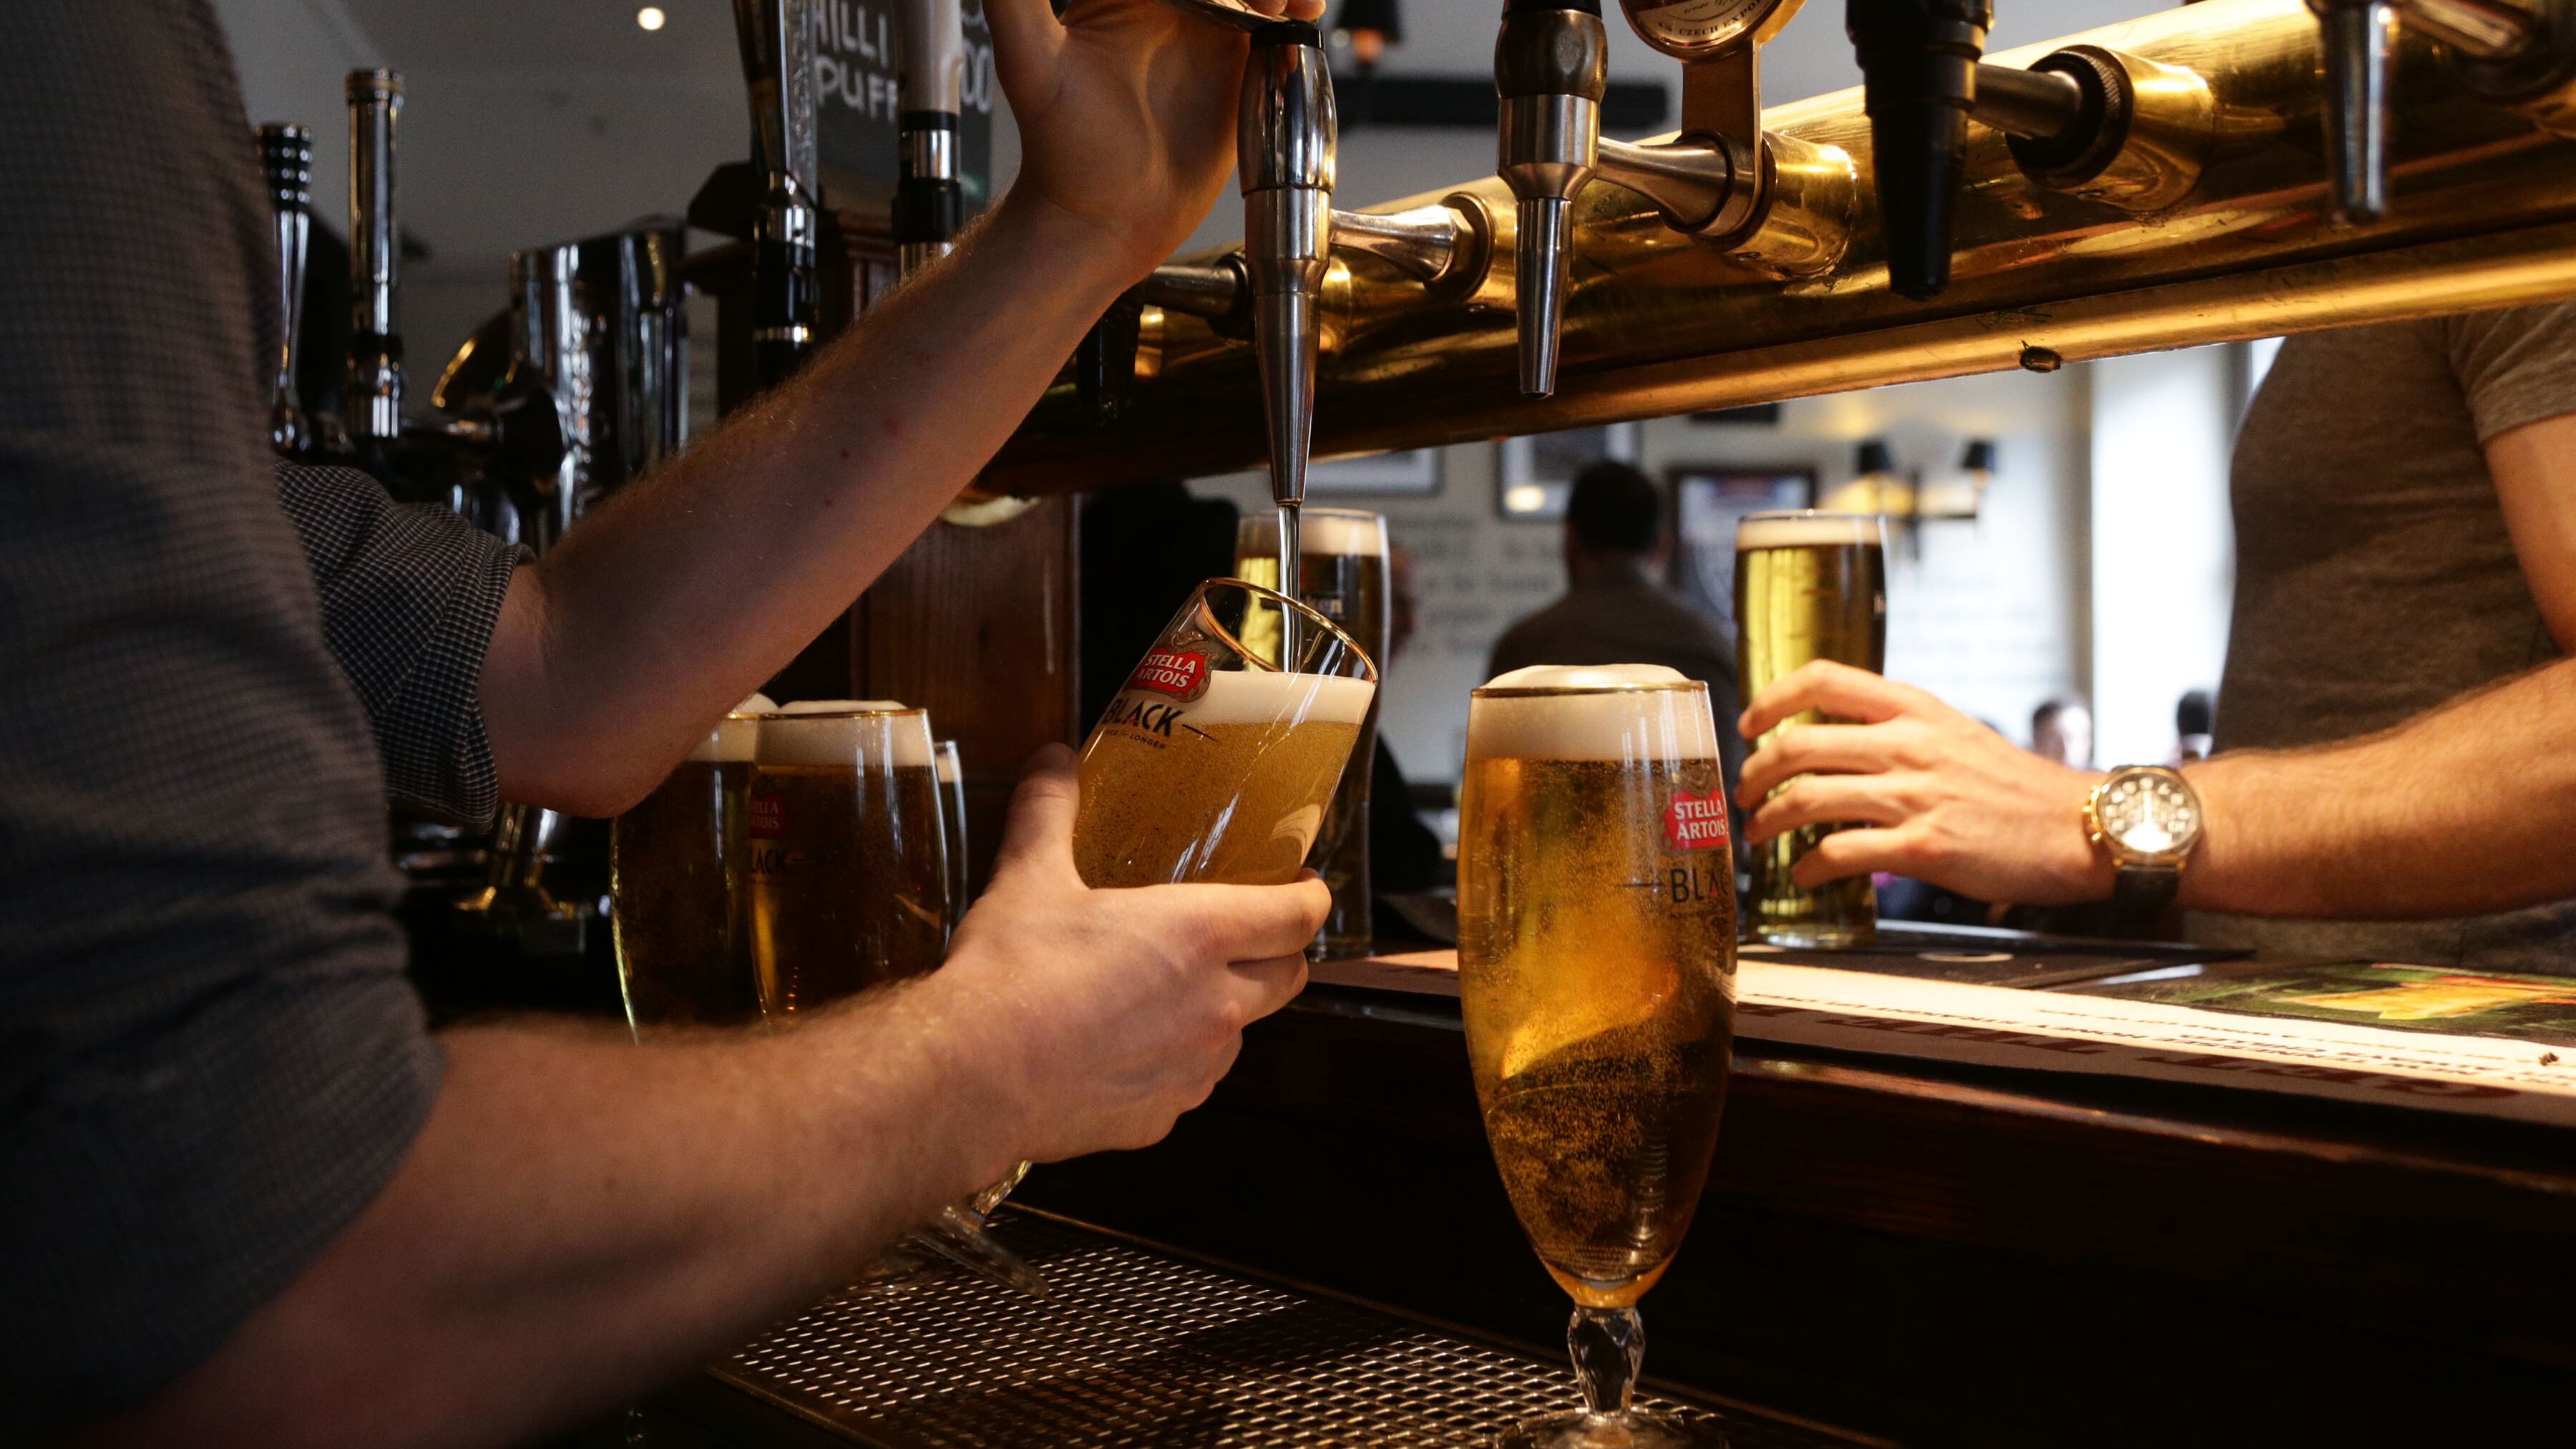 MPs support making it easier for pubs to stay open longer for major occasions